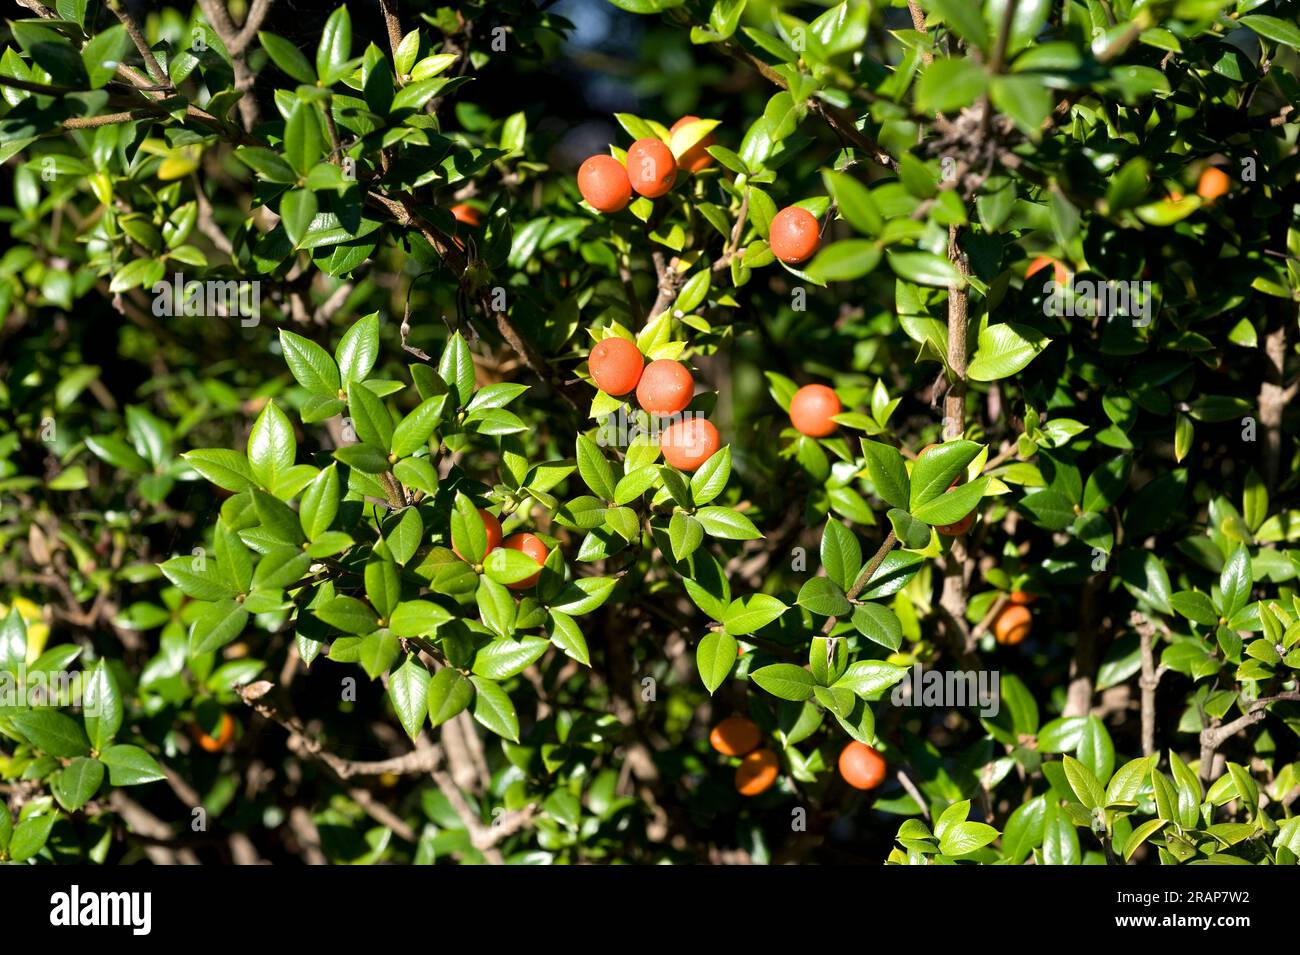 Chainfruit or prickly Alyxia (Alyxia ruscifolia), shrub of rainfall areas in Australia. Leaves and fruits detail. Angiosperms. Apocynaceae. Stock Photo